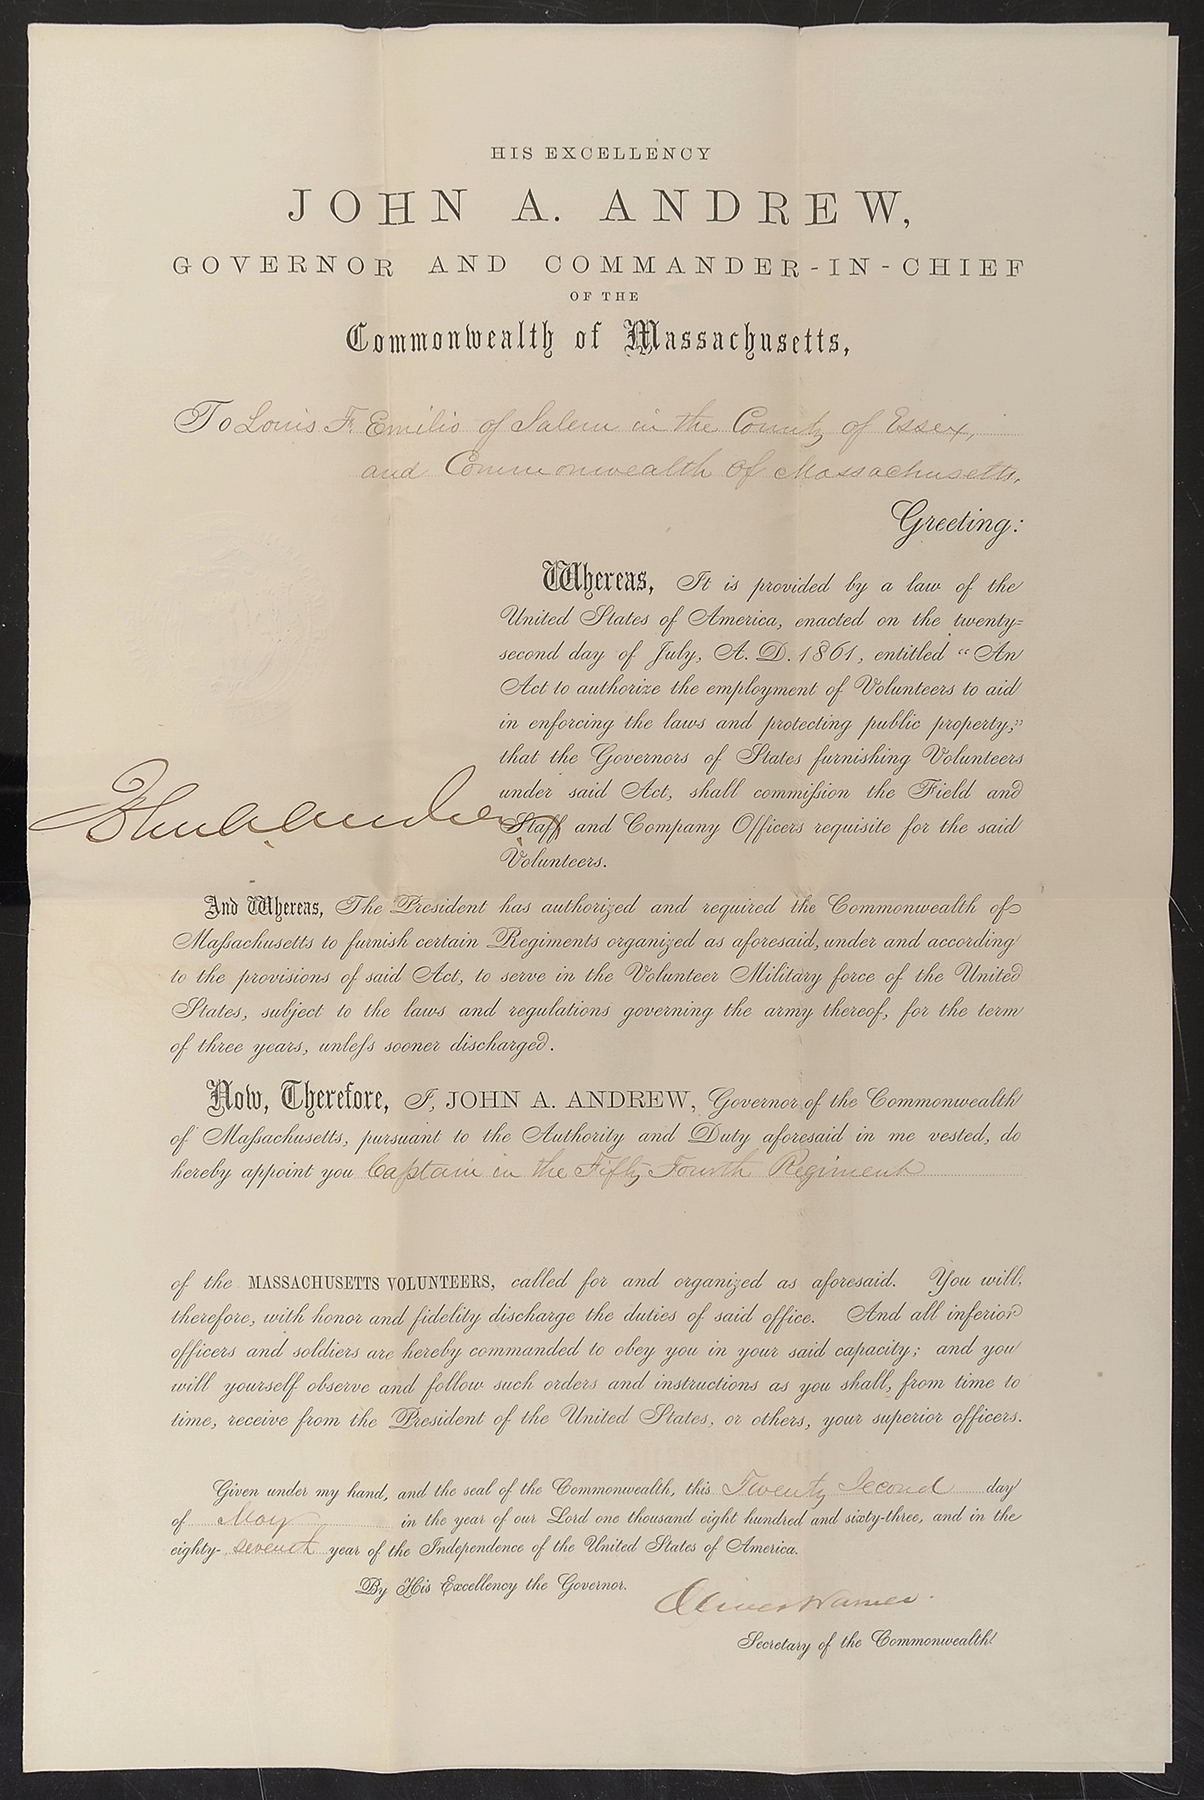 Emilio Commissioning Document Signed By Gov. Andrew Of Massachusetts From The Emilio Civil War Archive